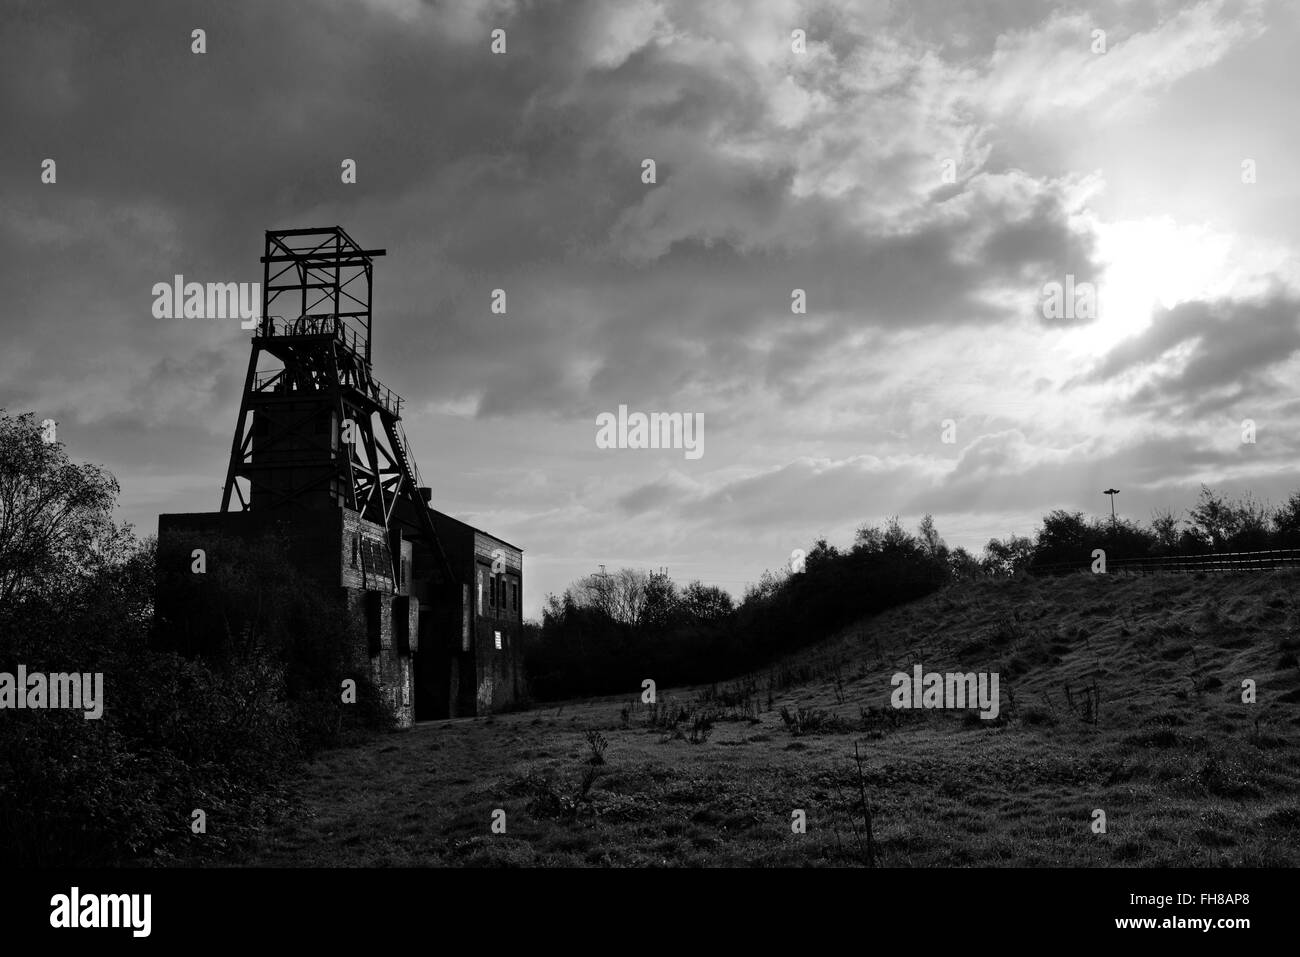 Barnsley Main (Oaks Colliery), in der Nähe von Stairfoot, Barnsley, West Riding of Yorkshire Stockfoto